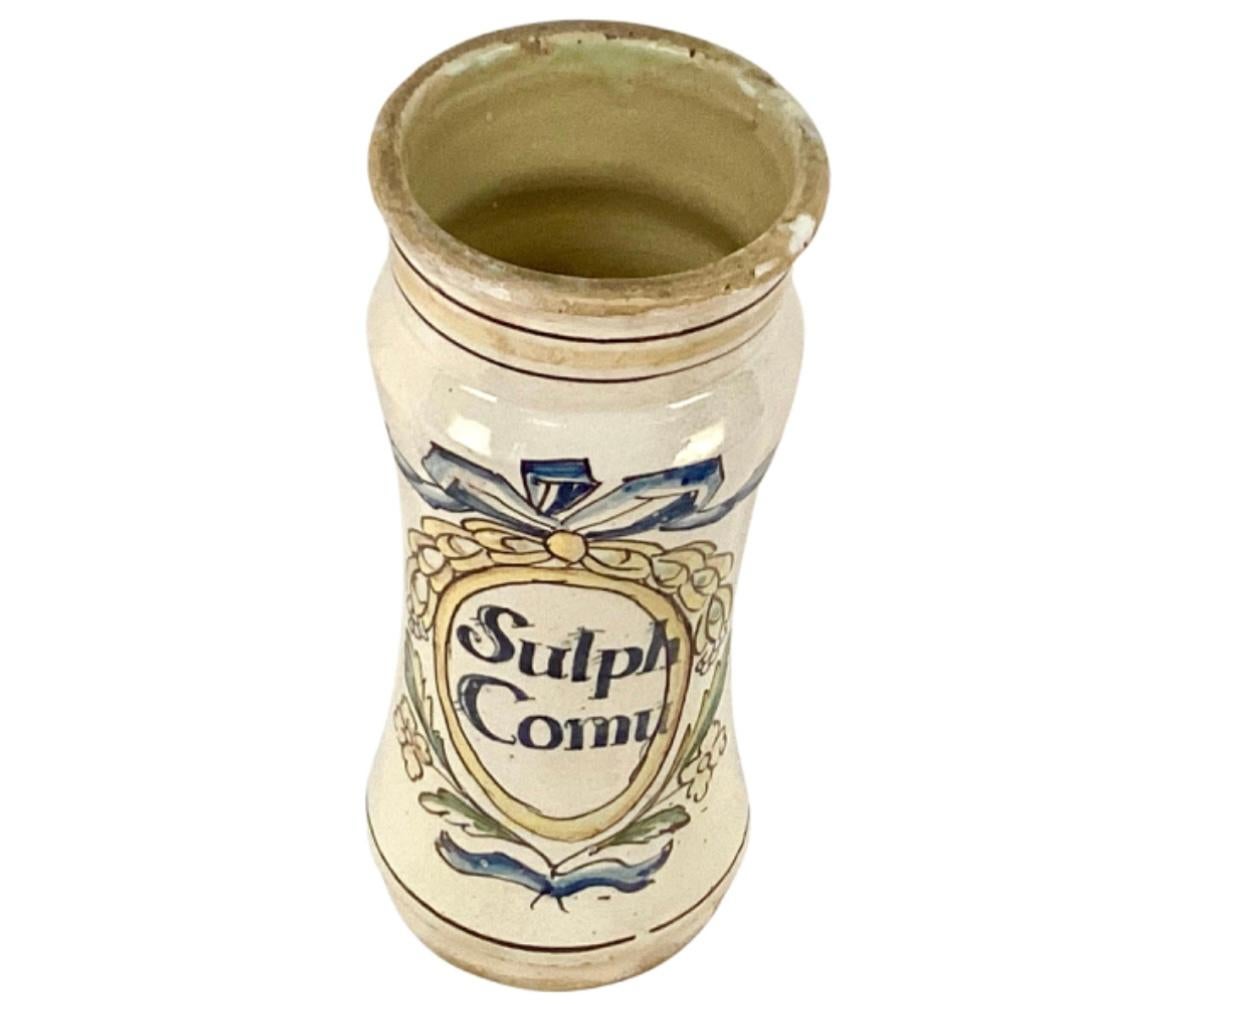 Tall vintage Italian ceramic apothecary jar. Has words 'Sulph Comu' on front. Floral and bow motif in colors of blue, yellow and green on off white background.